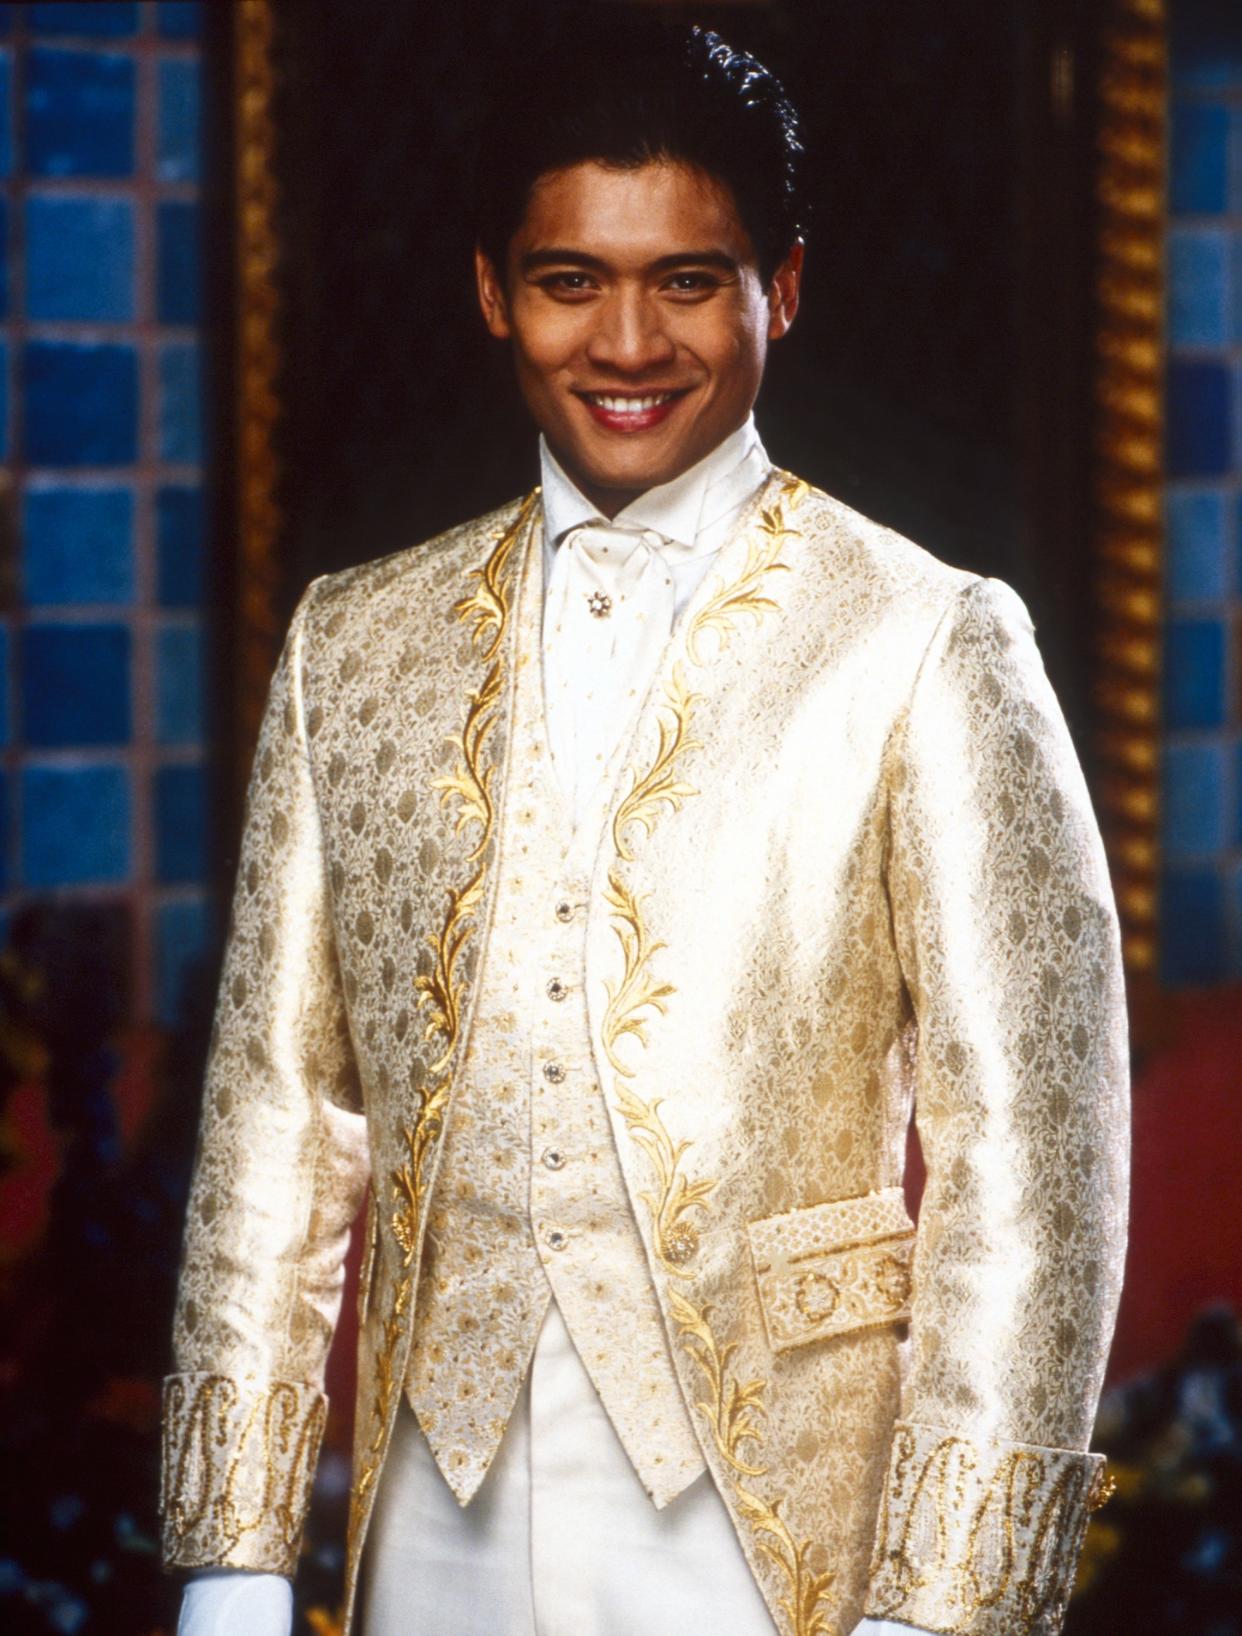 Before he played King Charming, actor Paolo Montalban, pictured here in the movie 